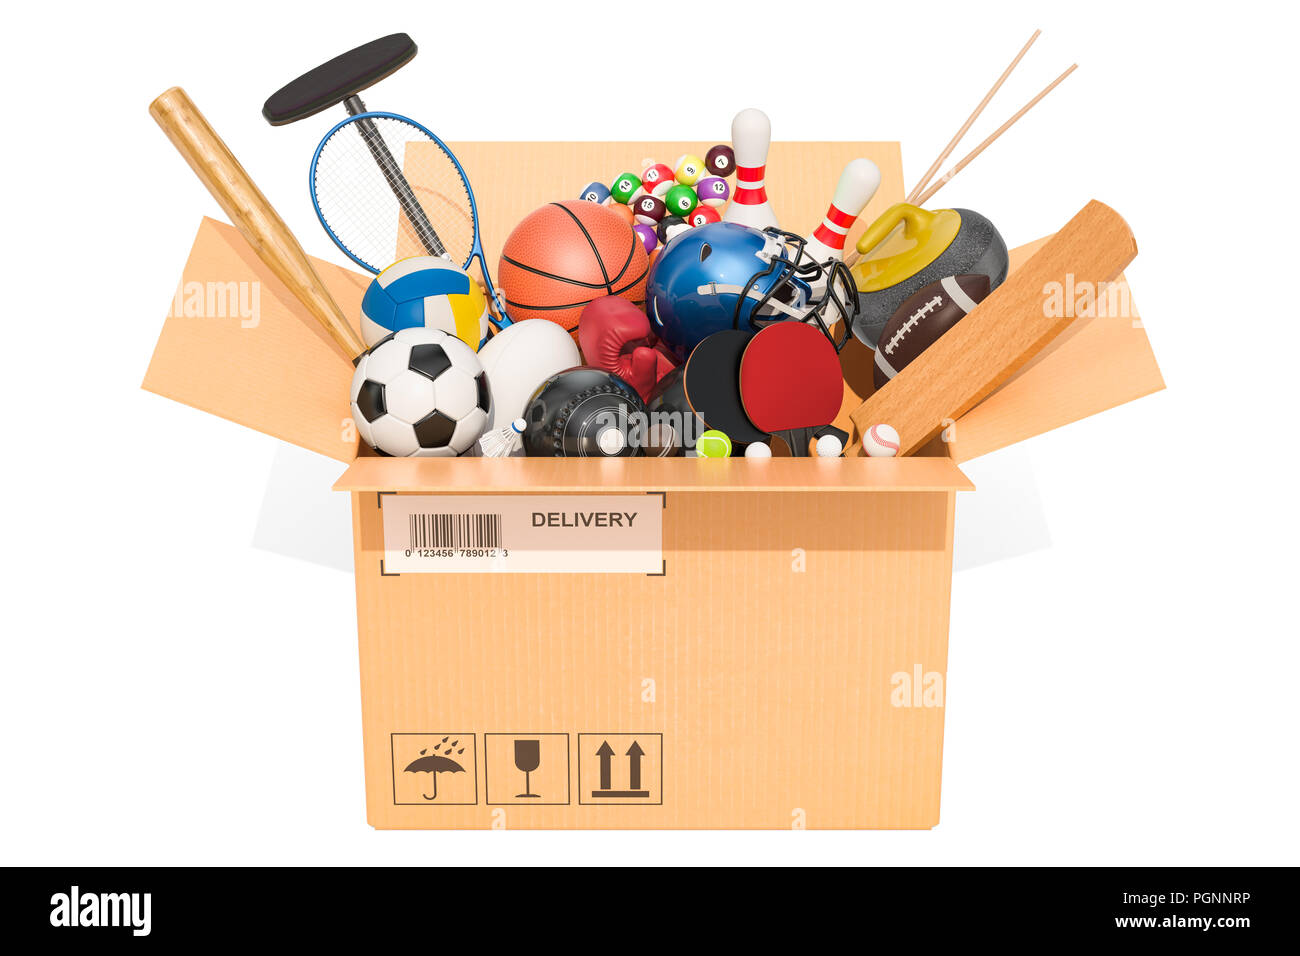 Sports game equipment inside cardboard box, delivery concept. 3D rendering isolated on white background Stock Photo